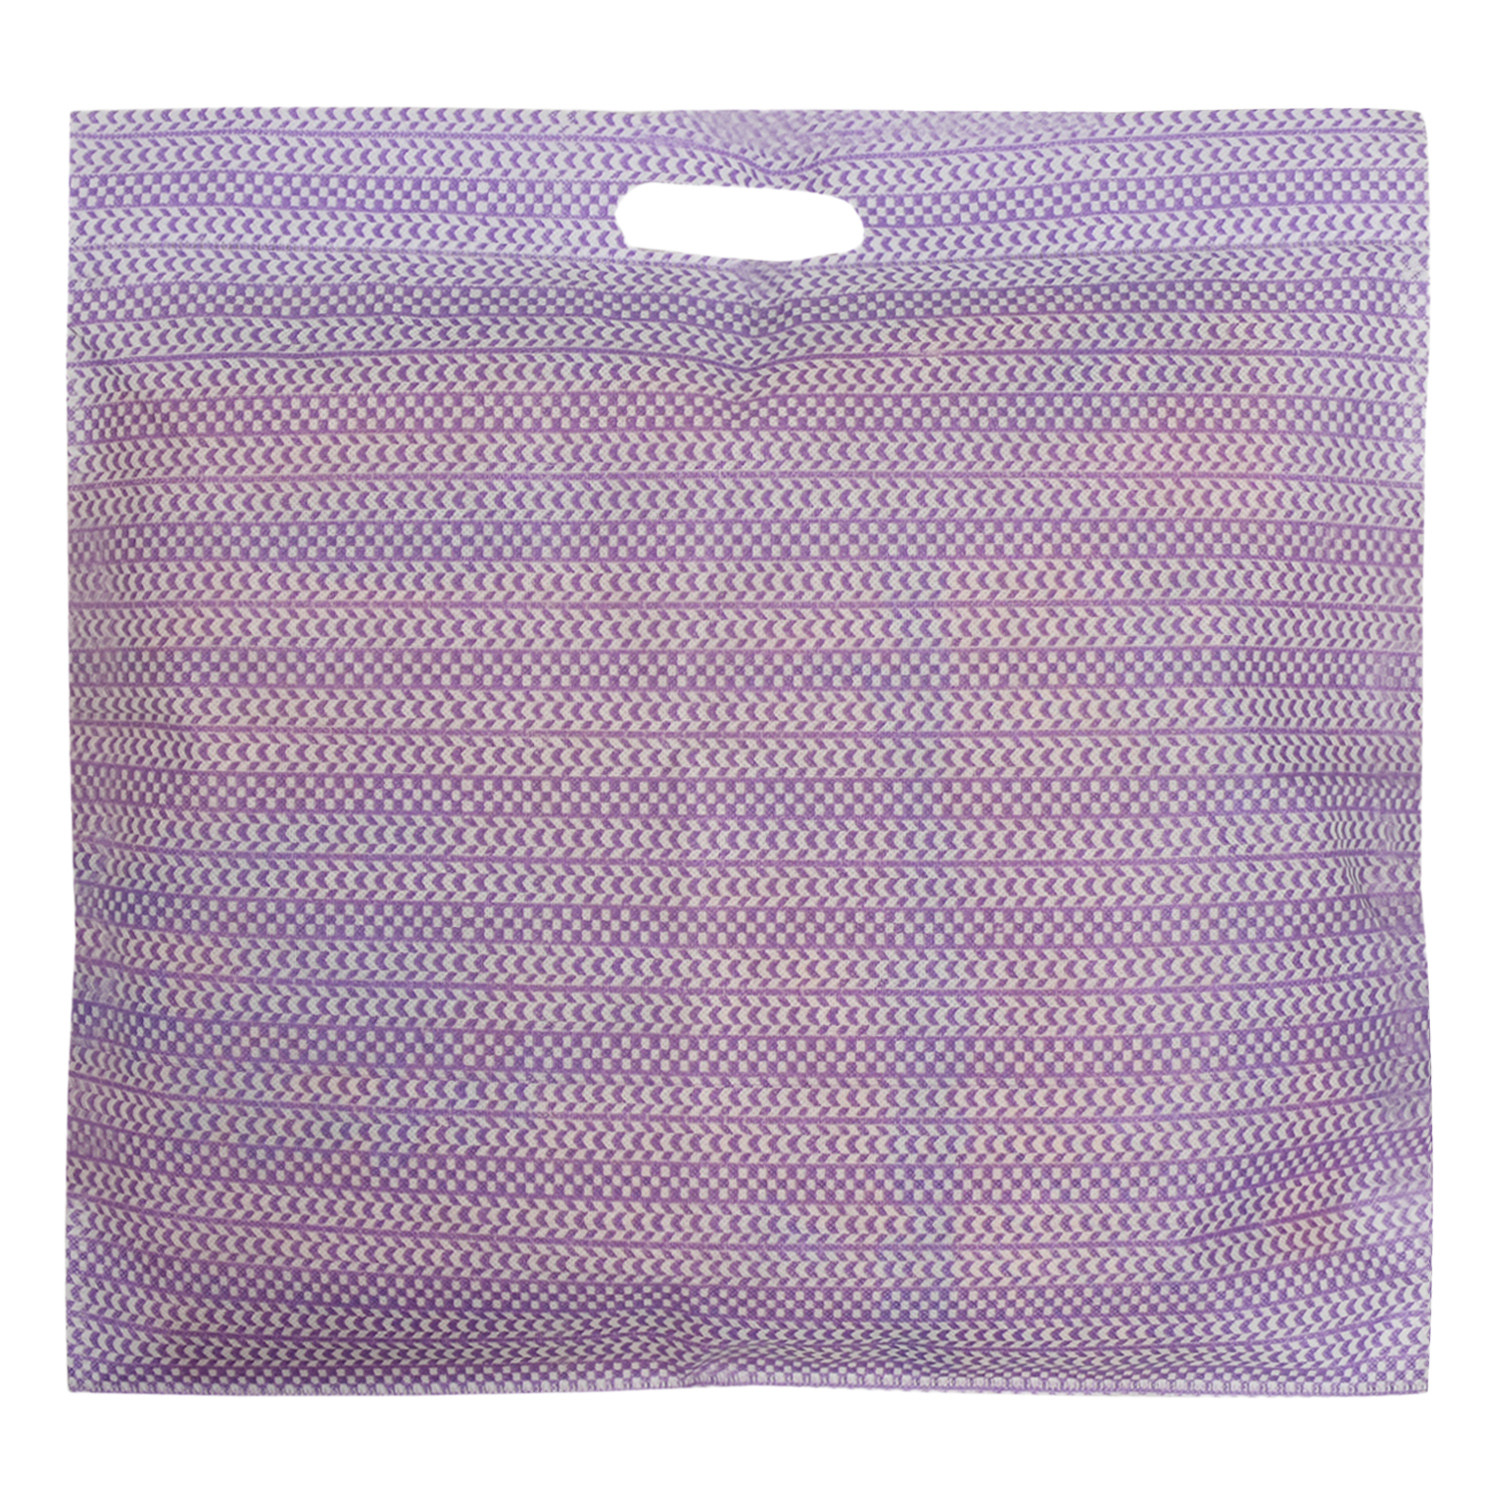 Kuber Industries Non-Woven Single Saree Covers With Transparent Window With Handle Pack of 18 (Purple & Pink)